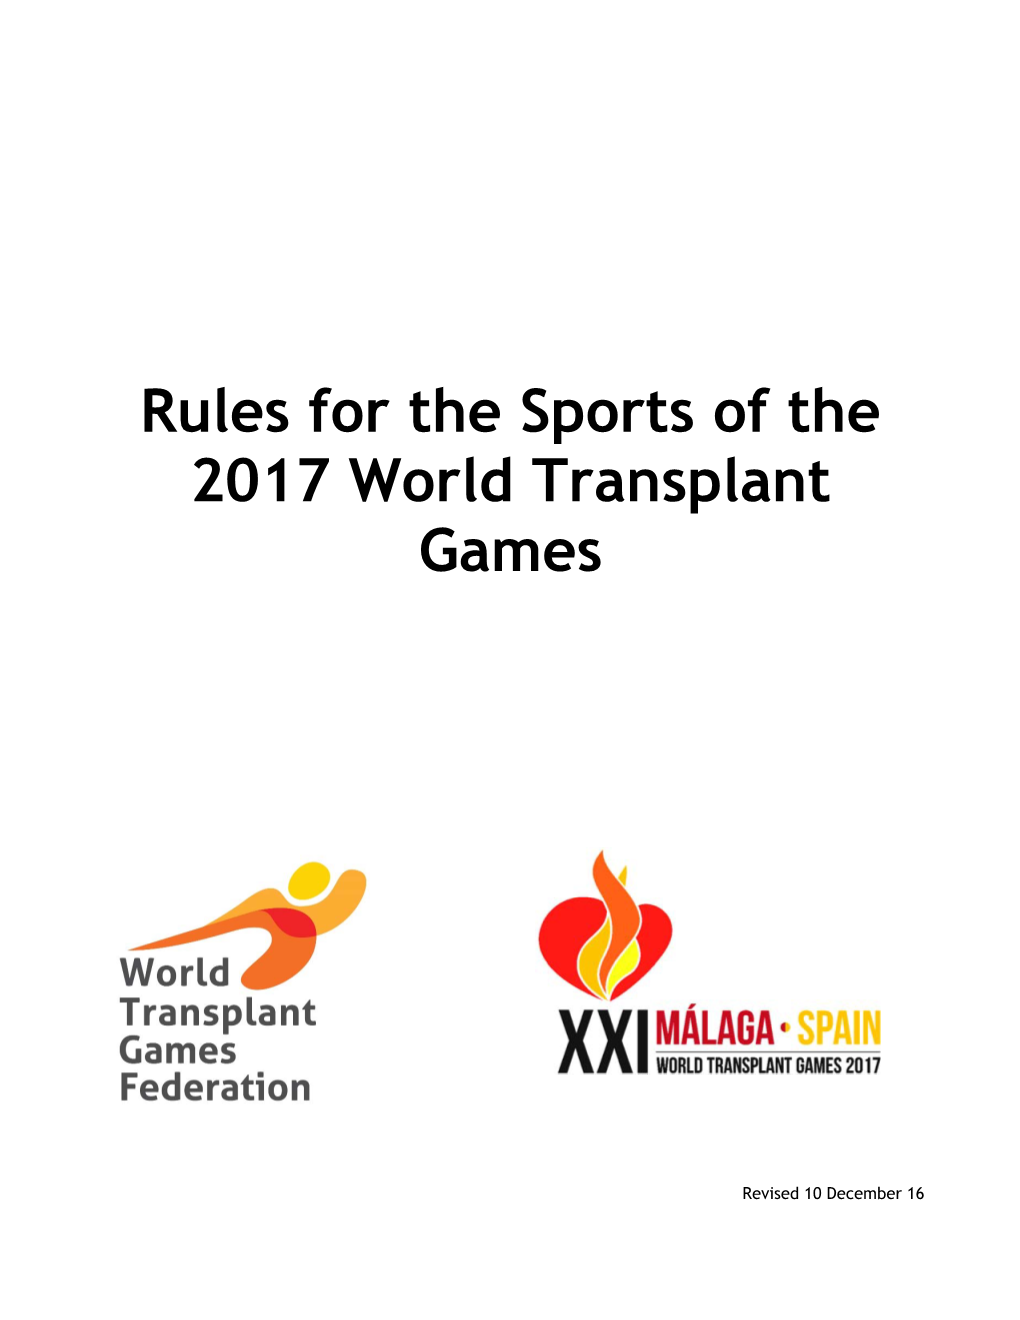 Rules for the Sports of the 2017 World Transplant Games